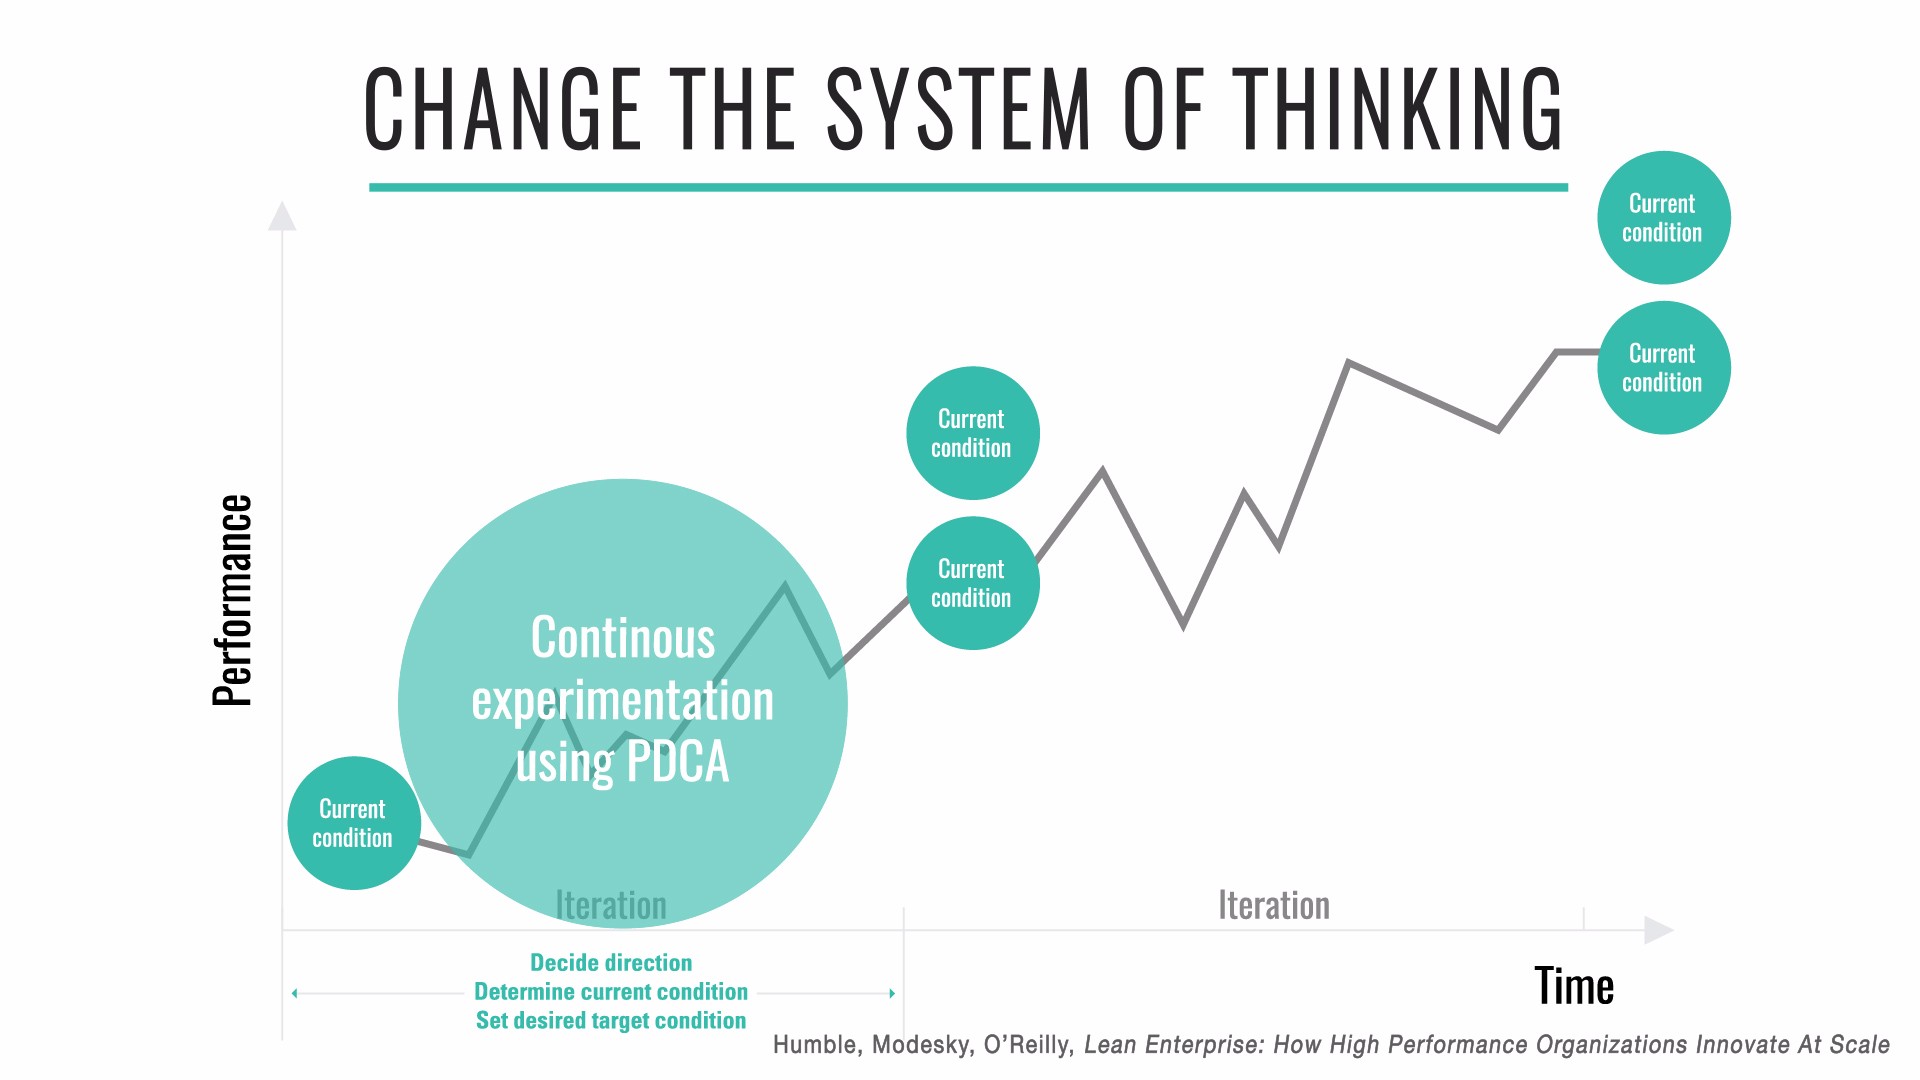 Change the system of thinking